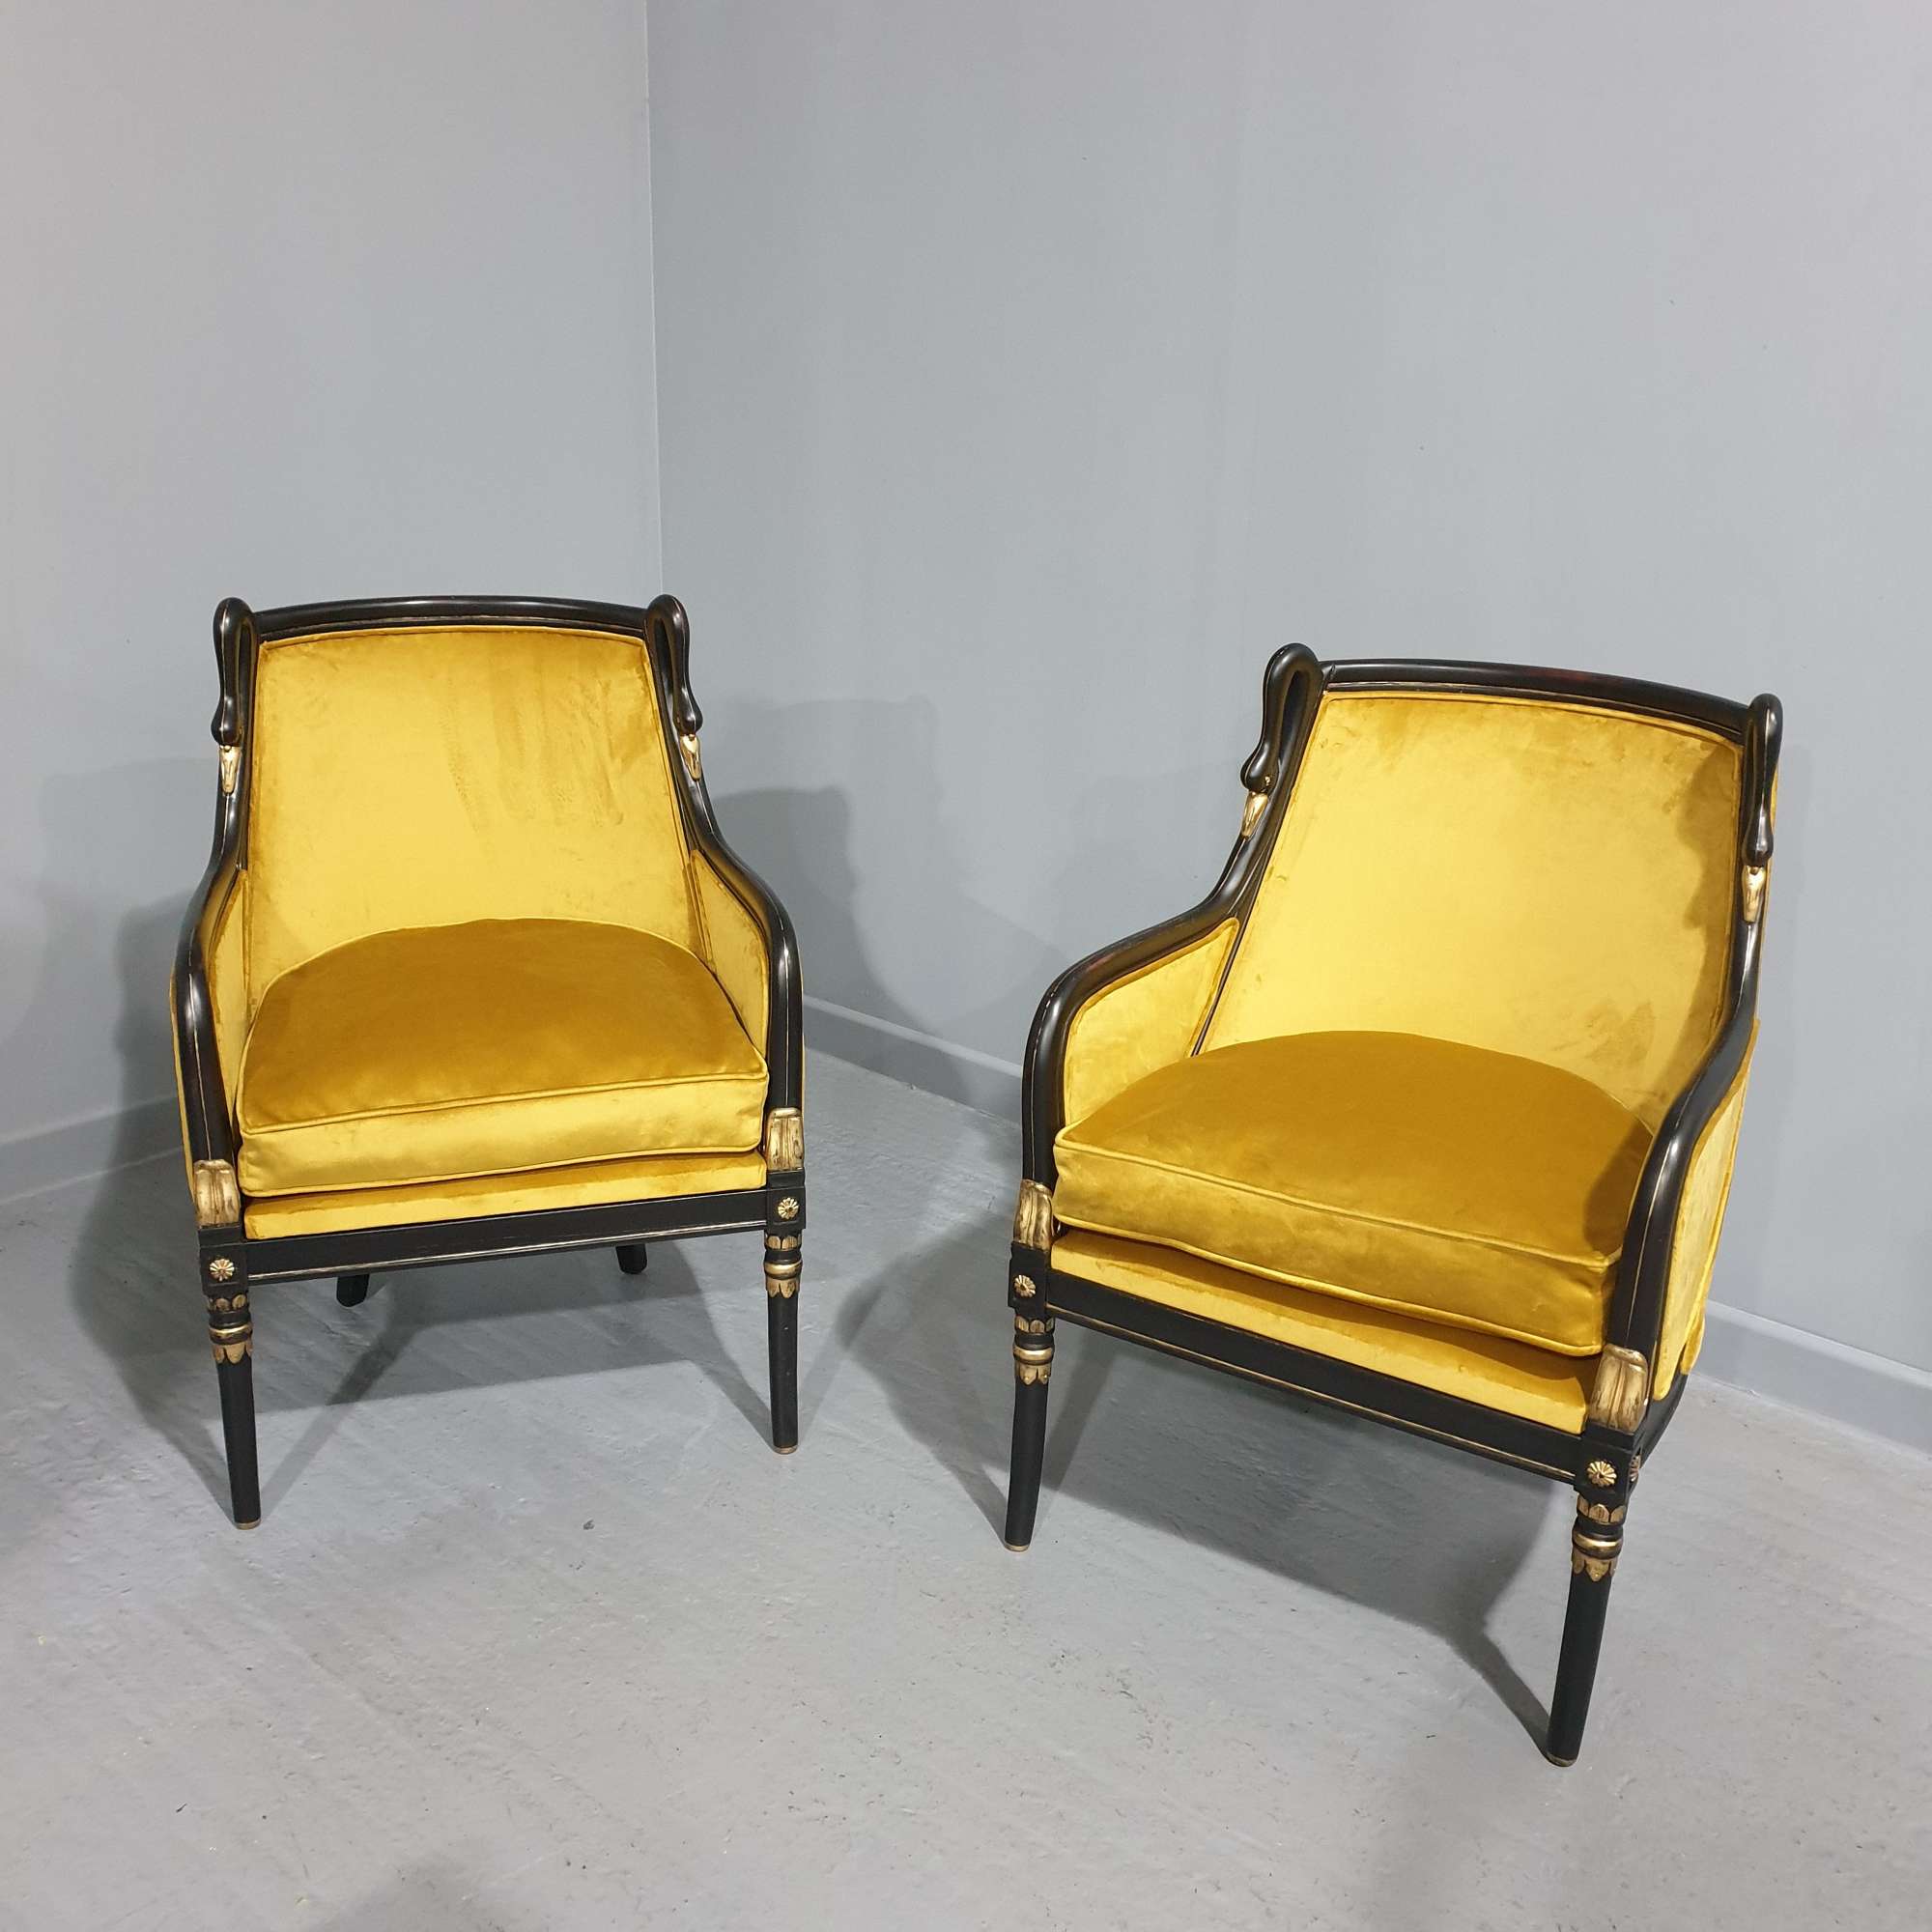 Wonderful Pair French Empire Chairs